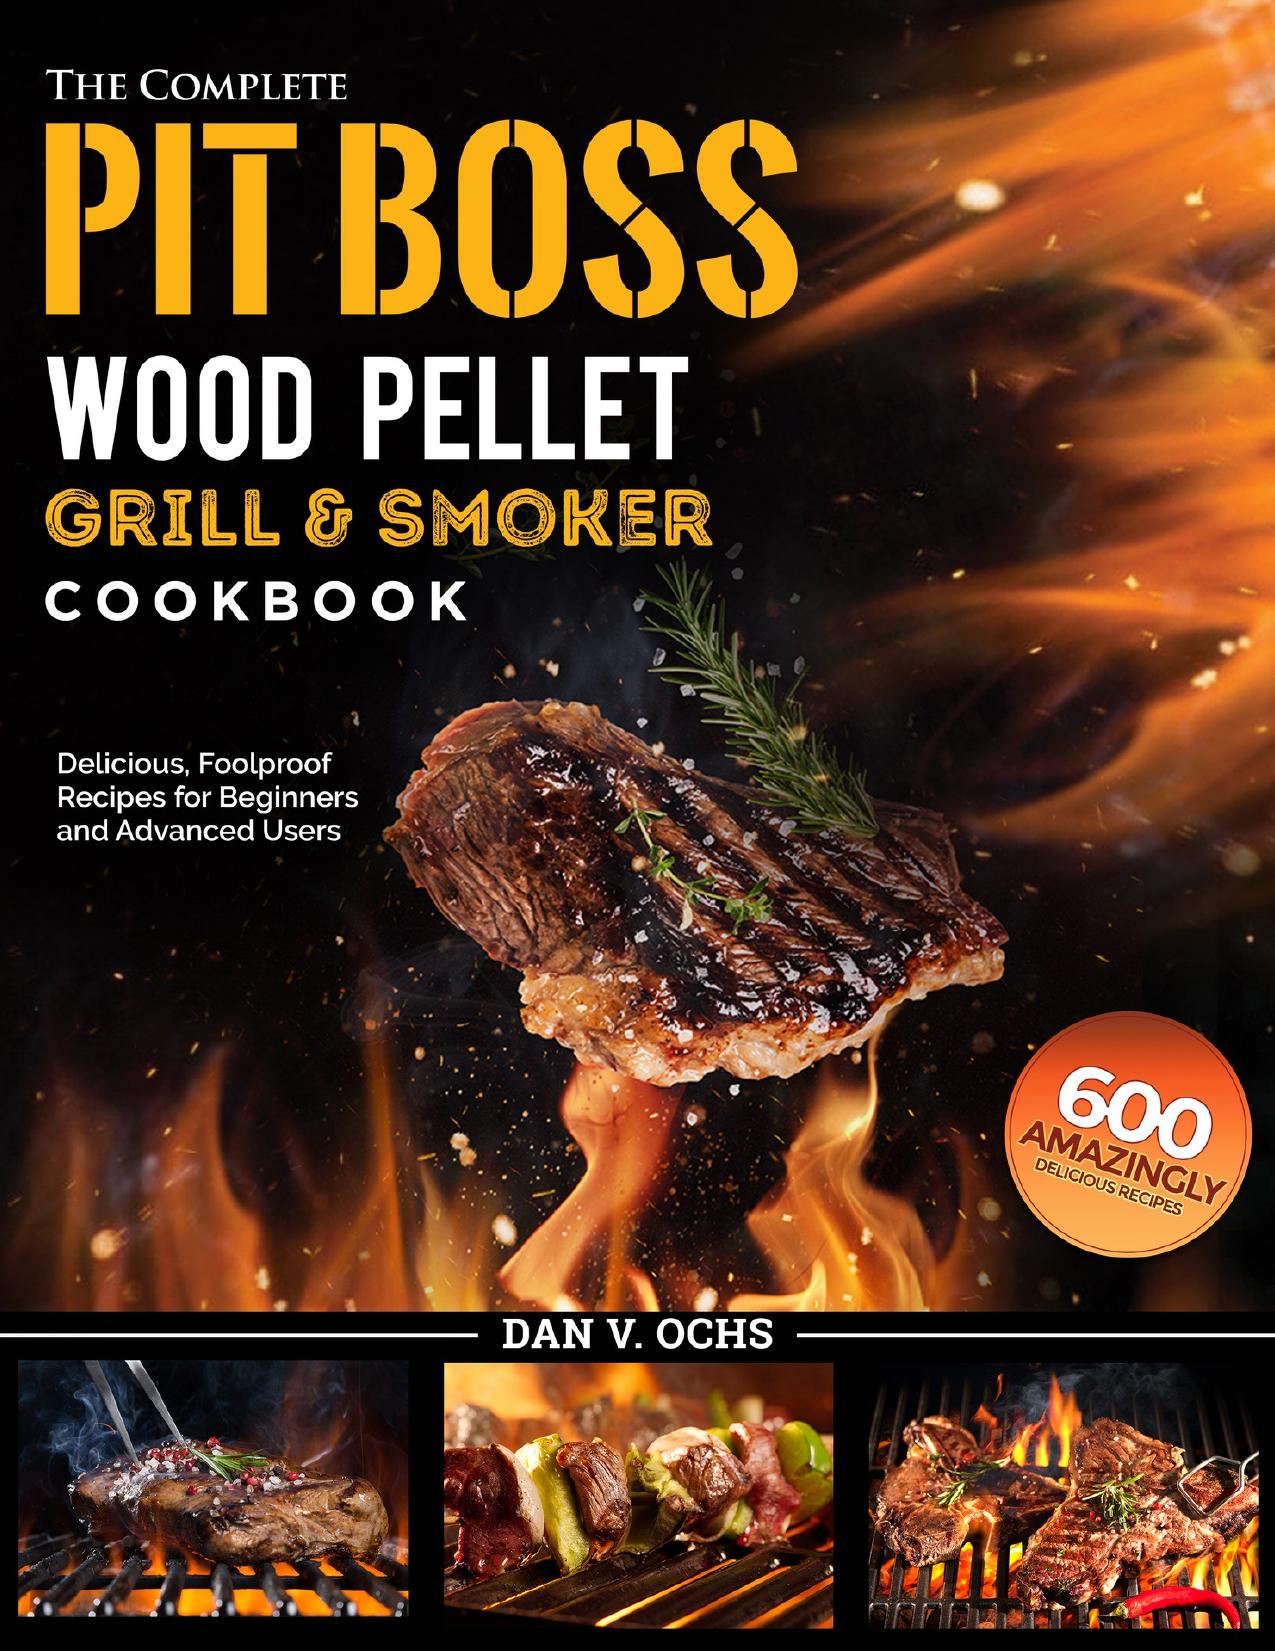 The Complete Pit Boss Wood Pellet Grill & Smoker Cookbook: 600 Amazingly Delicious, Foolproof Recipes for Beginners and Advanced Users by Ochs Dan V